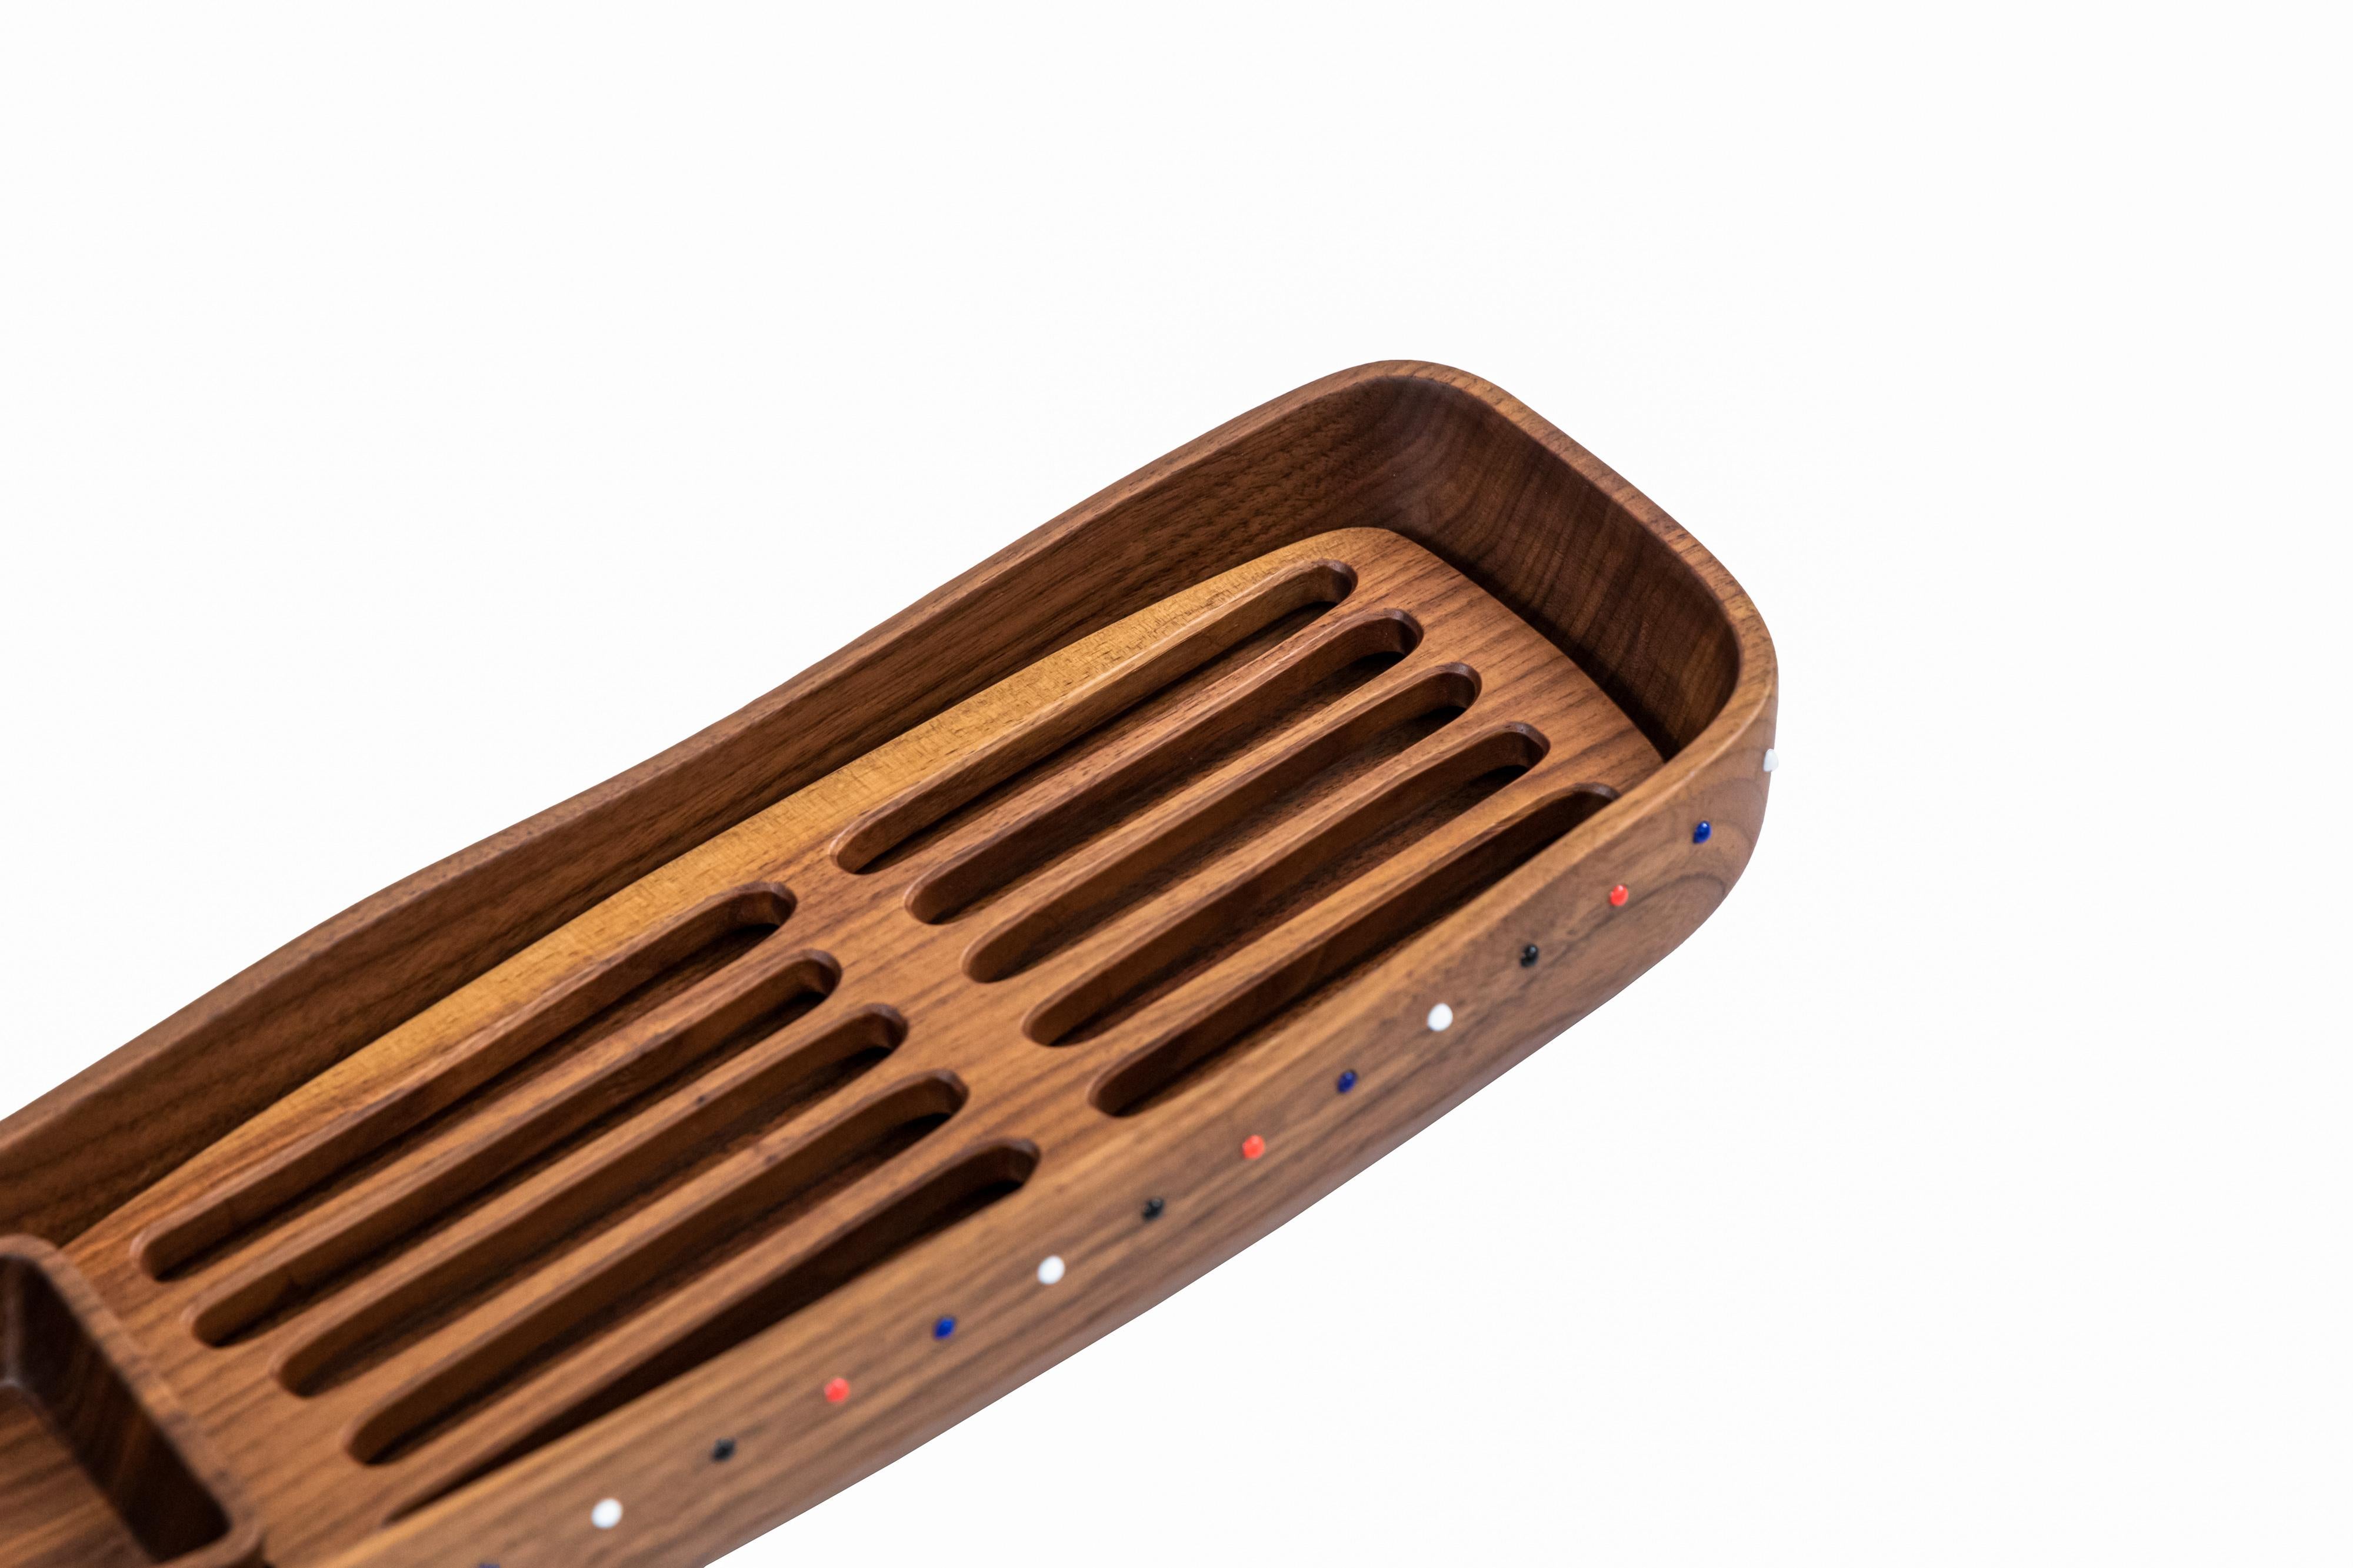 Hand-Crafted Appetizer and bread wooden serving tray from the SoShiro Pok collection For Sale